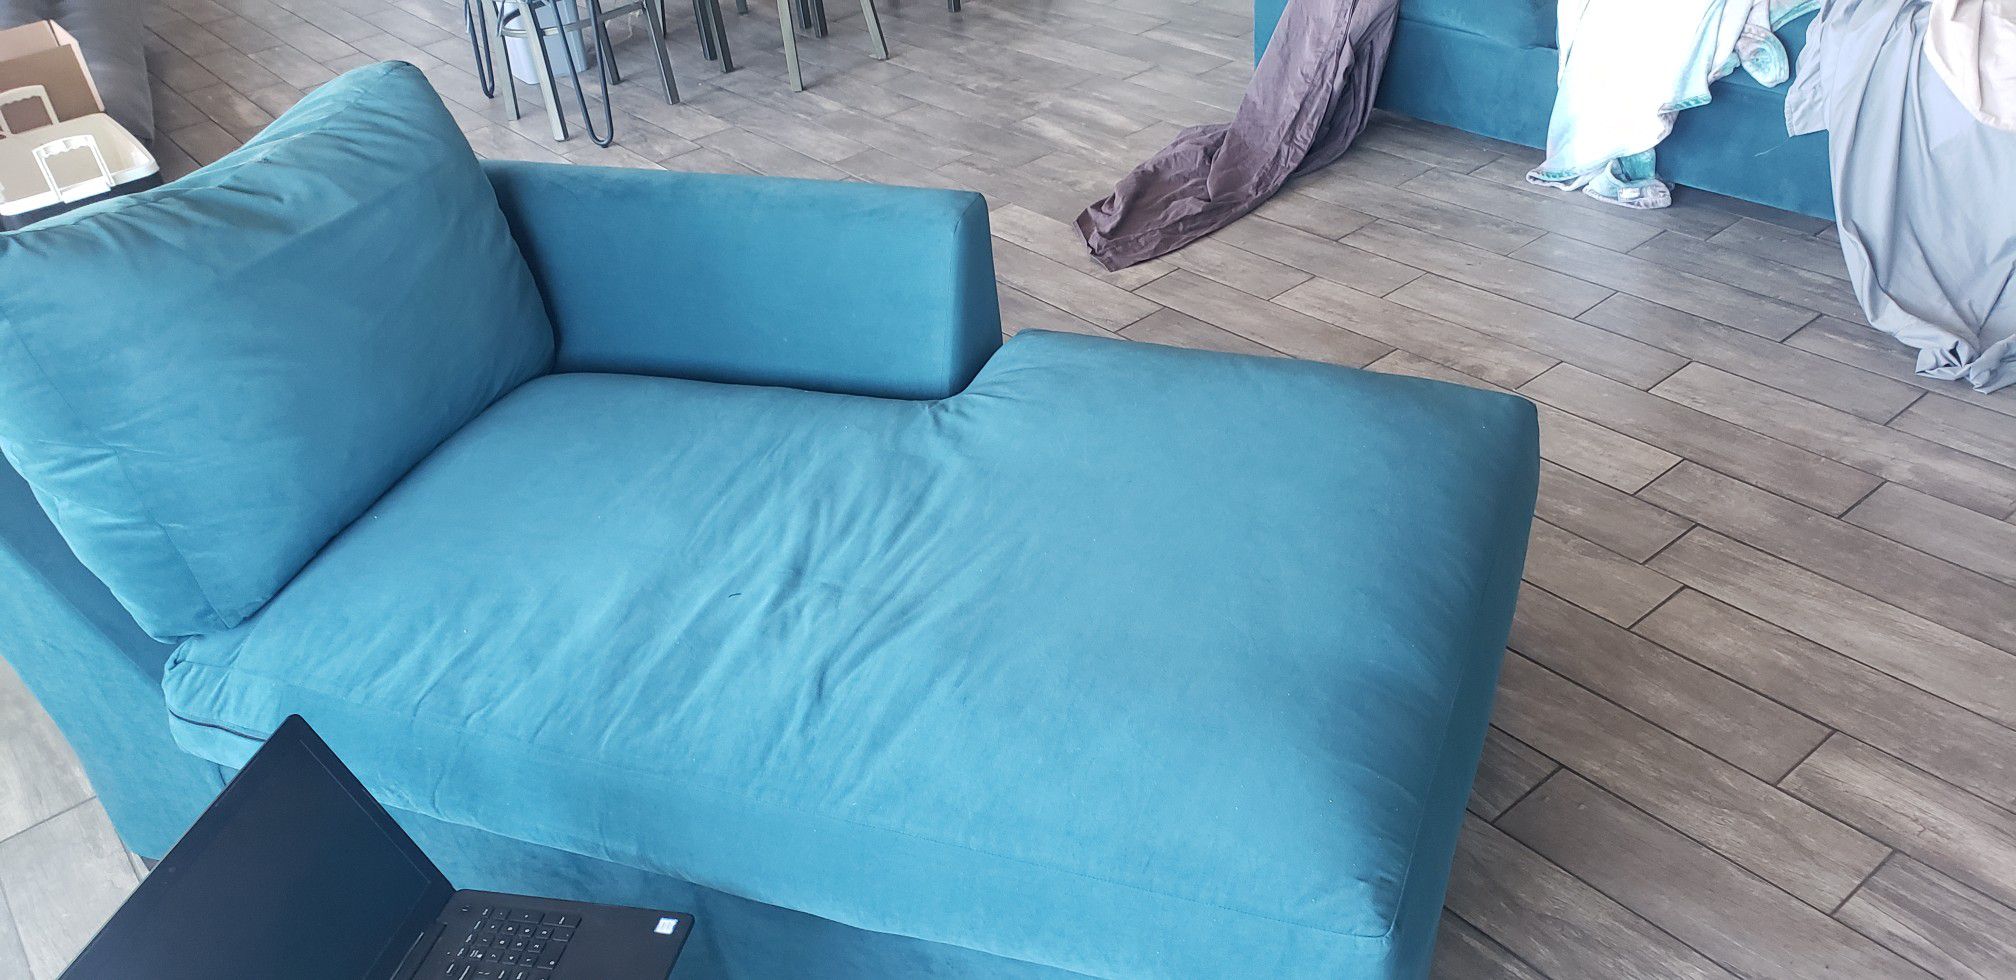 Teal Couch 2 Piece Sectional